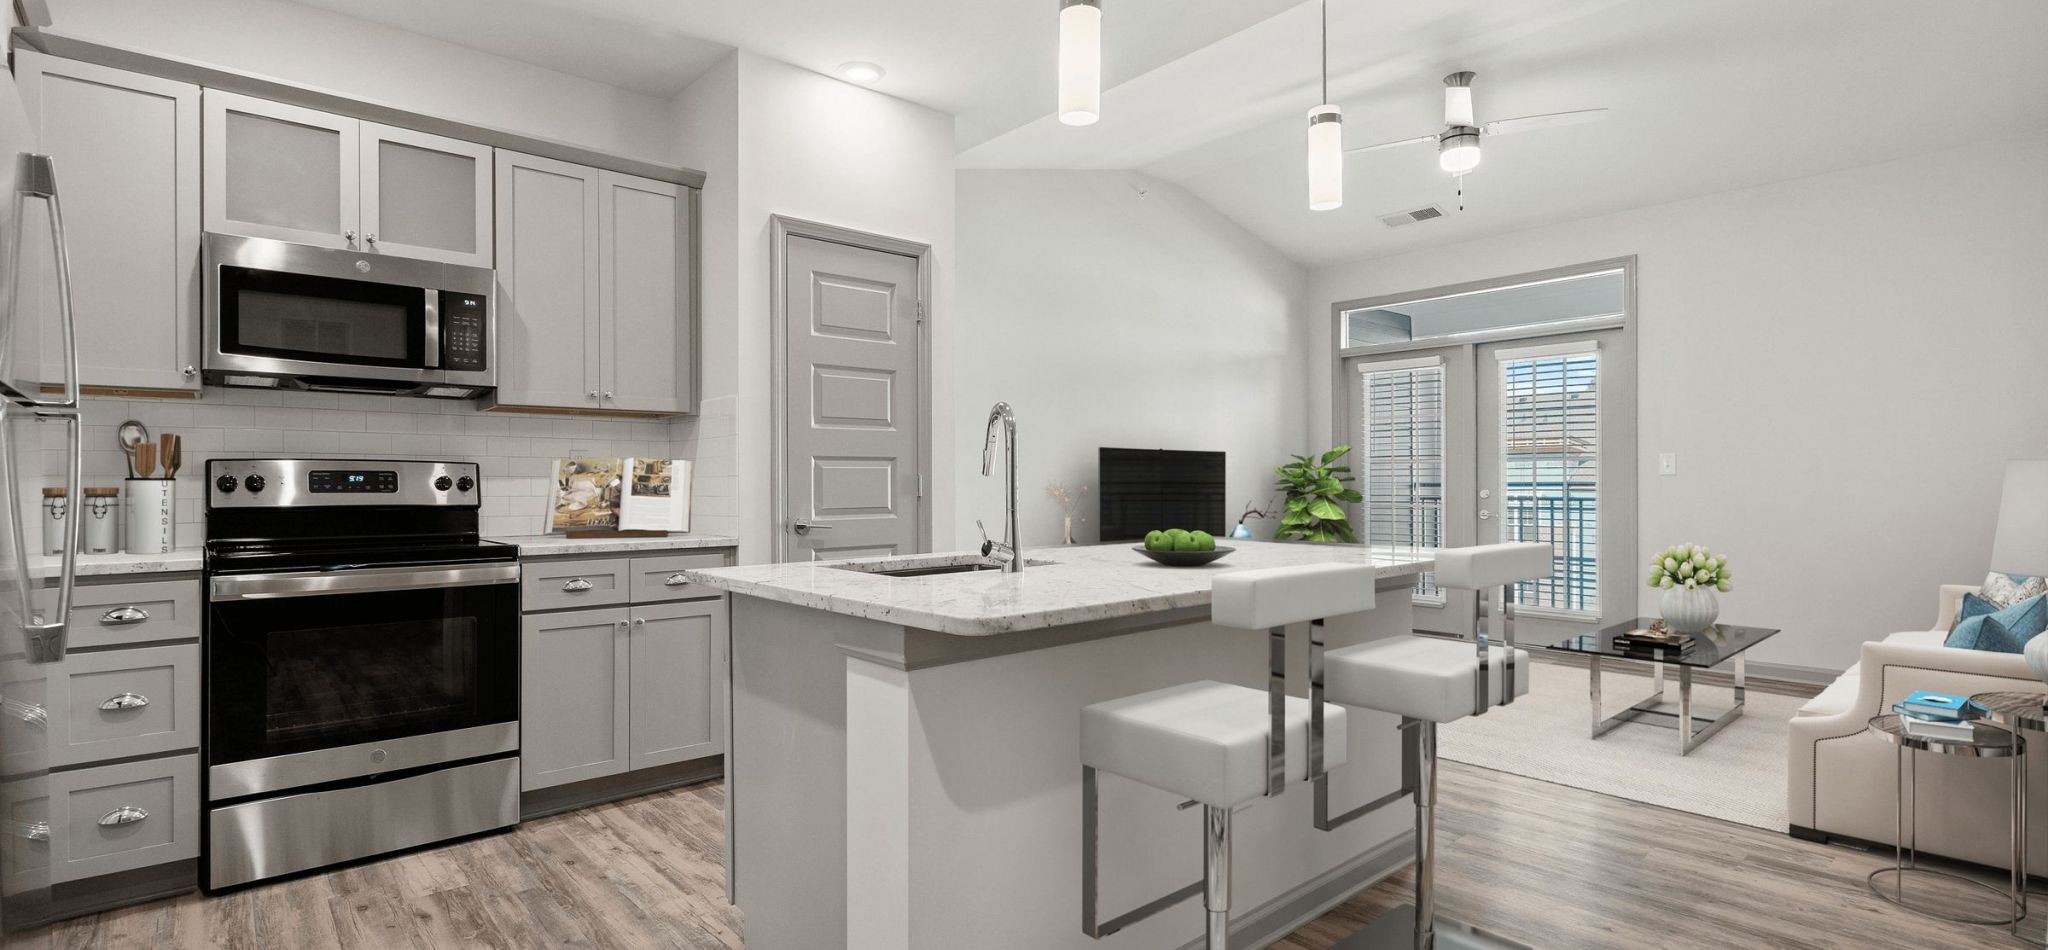 Hawthorne at Westport apartment kitchen interior with kitchen island, stainless steel appliances, and white cabinetry